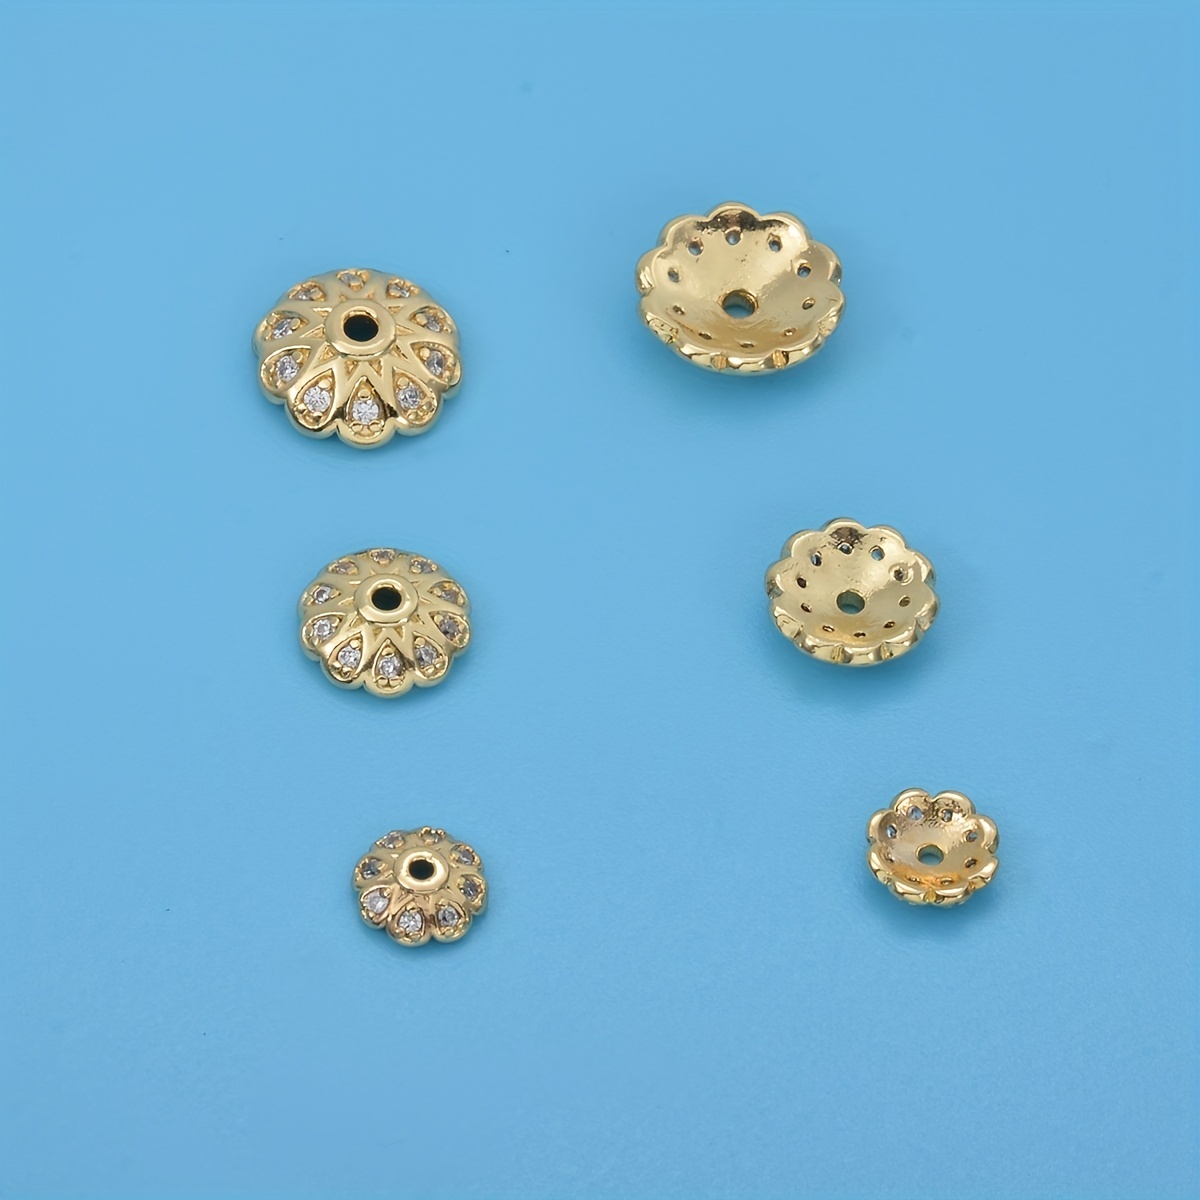 500PCS 10mm Gold Tone Flower Bead Caps Hollow Flower Bead Caps for Jewelry  Making (Multi)